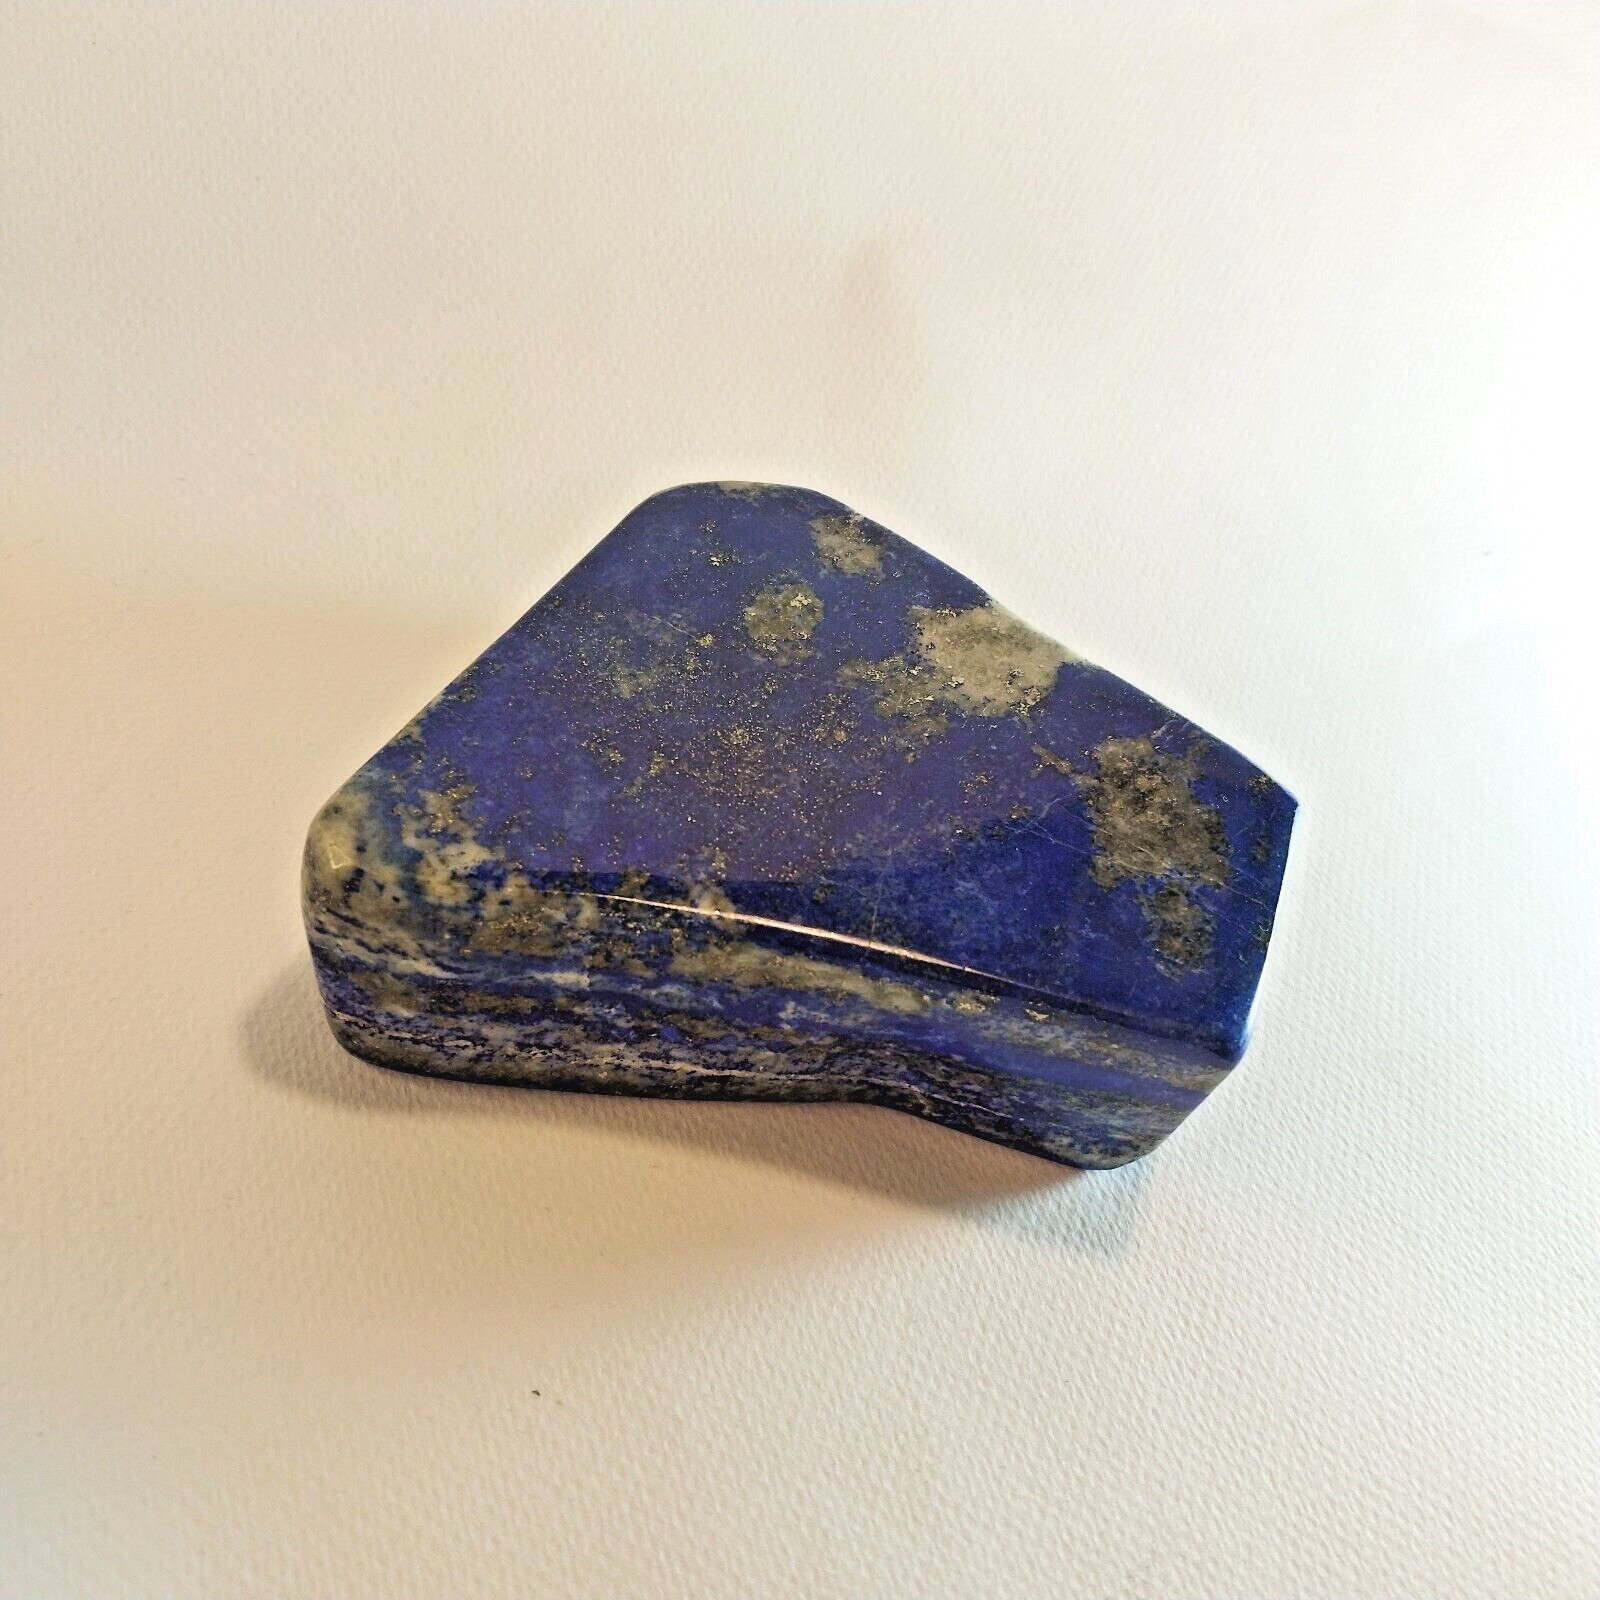 588Grams Natural Stone, Sodalite or is it Lapis? im not sure 100% natural